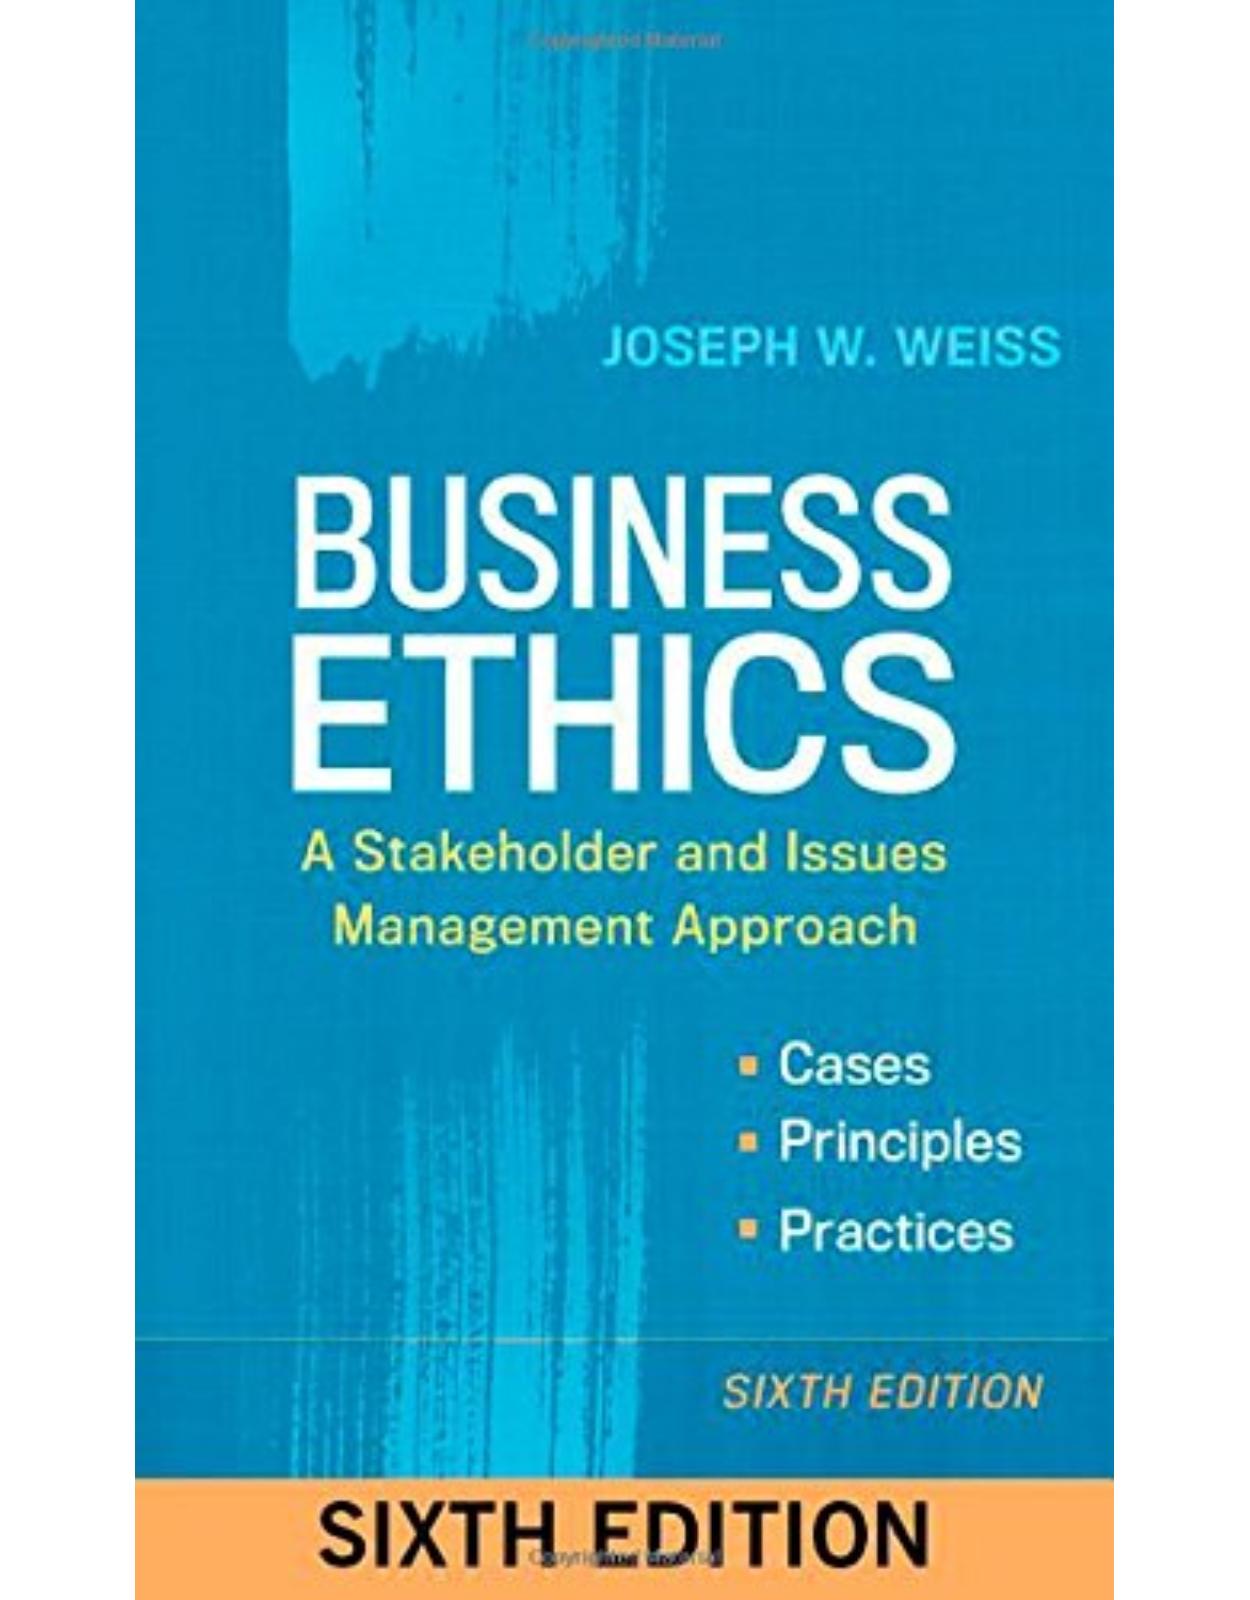 Business Ethics: A Stakeholder and Issues Management Approach (BK Business) 